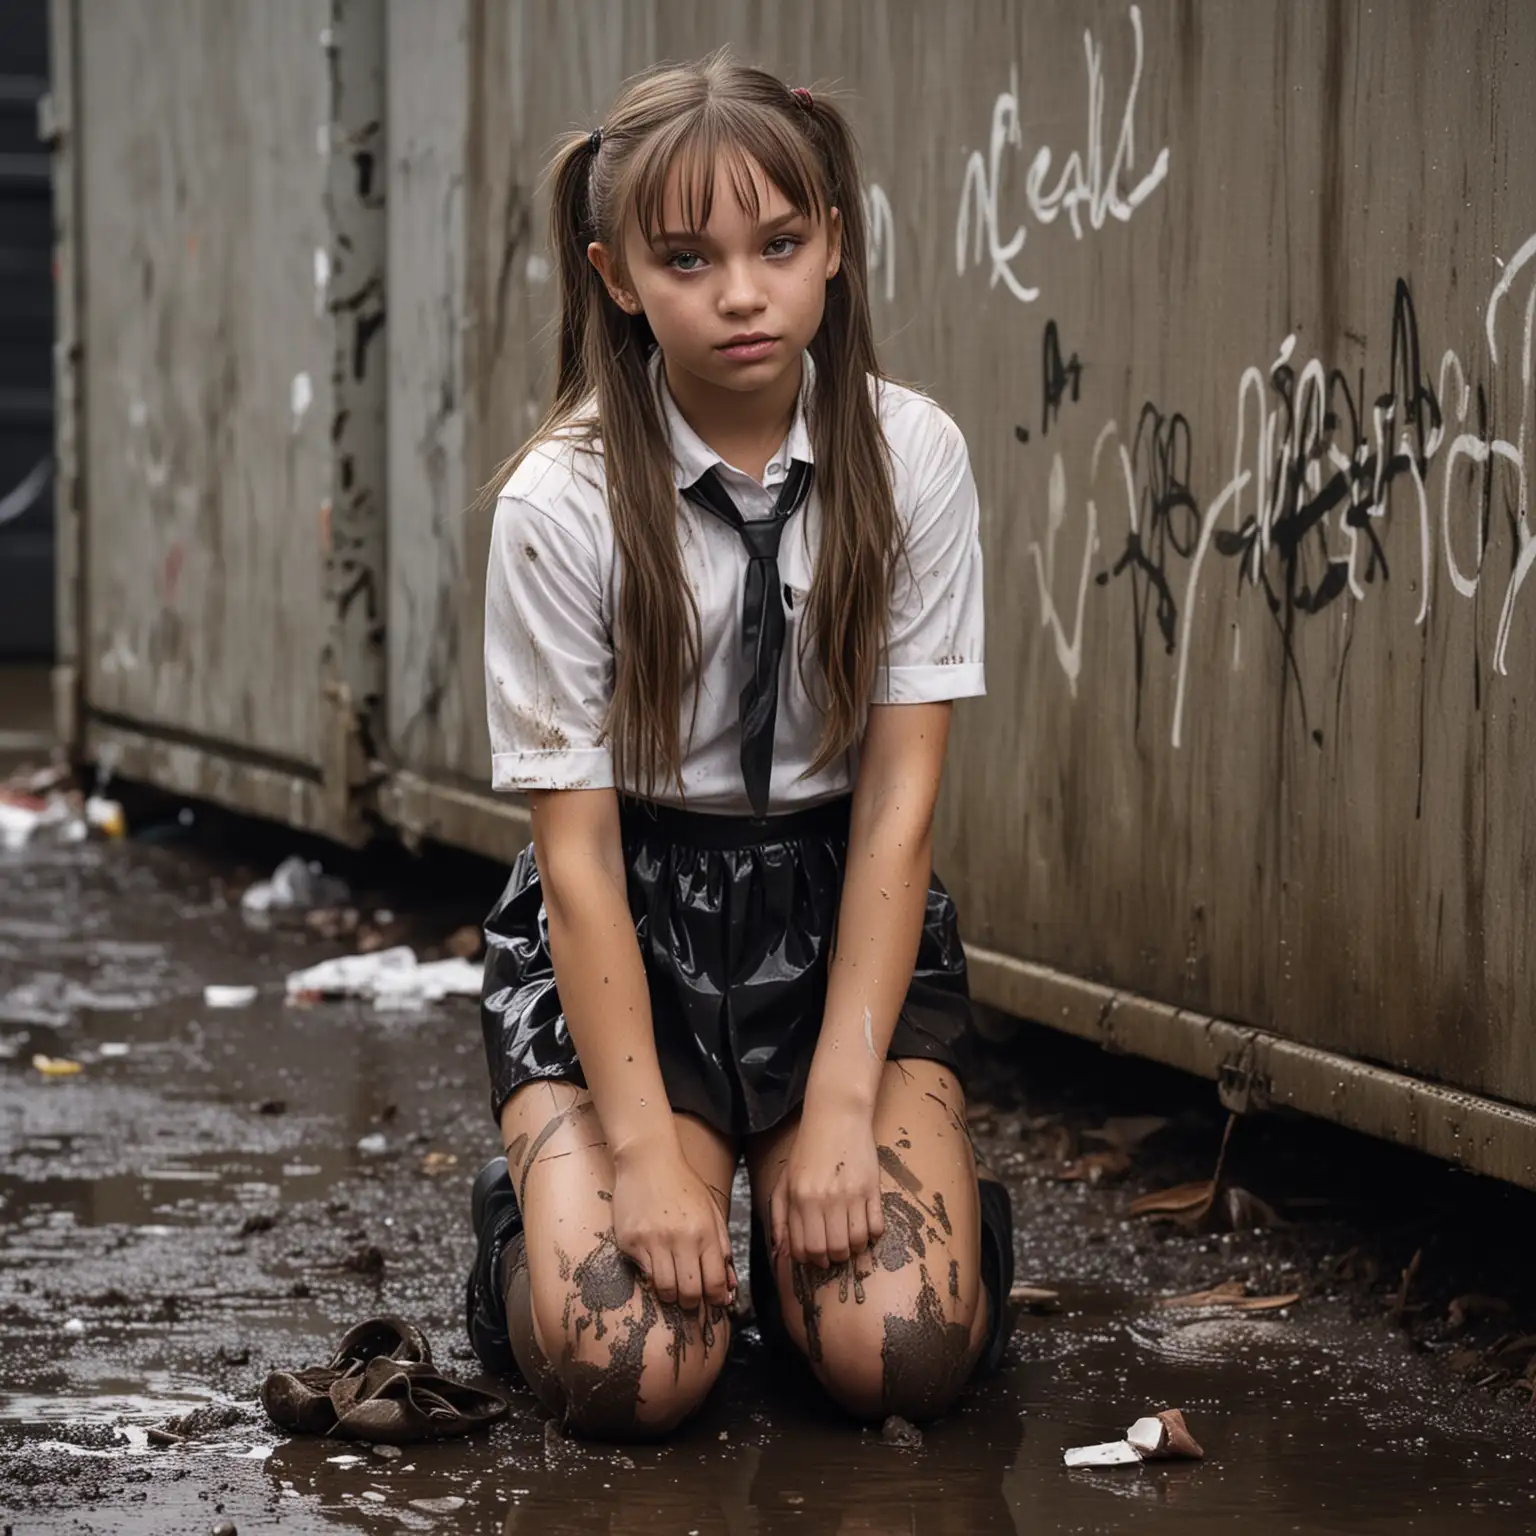 photorealistic, young maddie ziegler, dressed as a schoolgirl, pigtails, on her knees in front a dumpster, night, muddy, trash, dirty, wet, stained, grim, graffitti